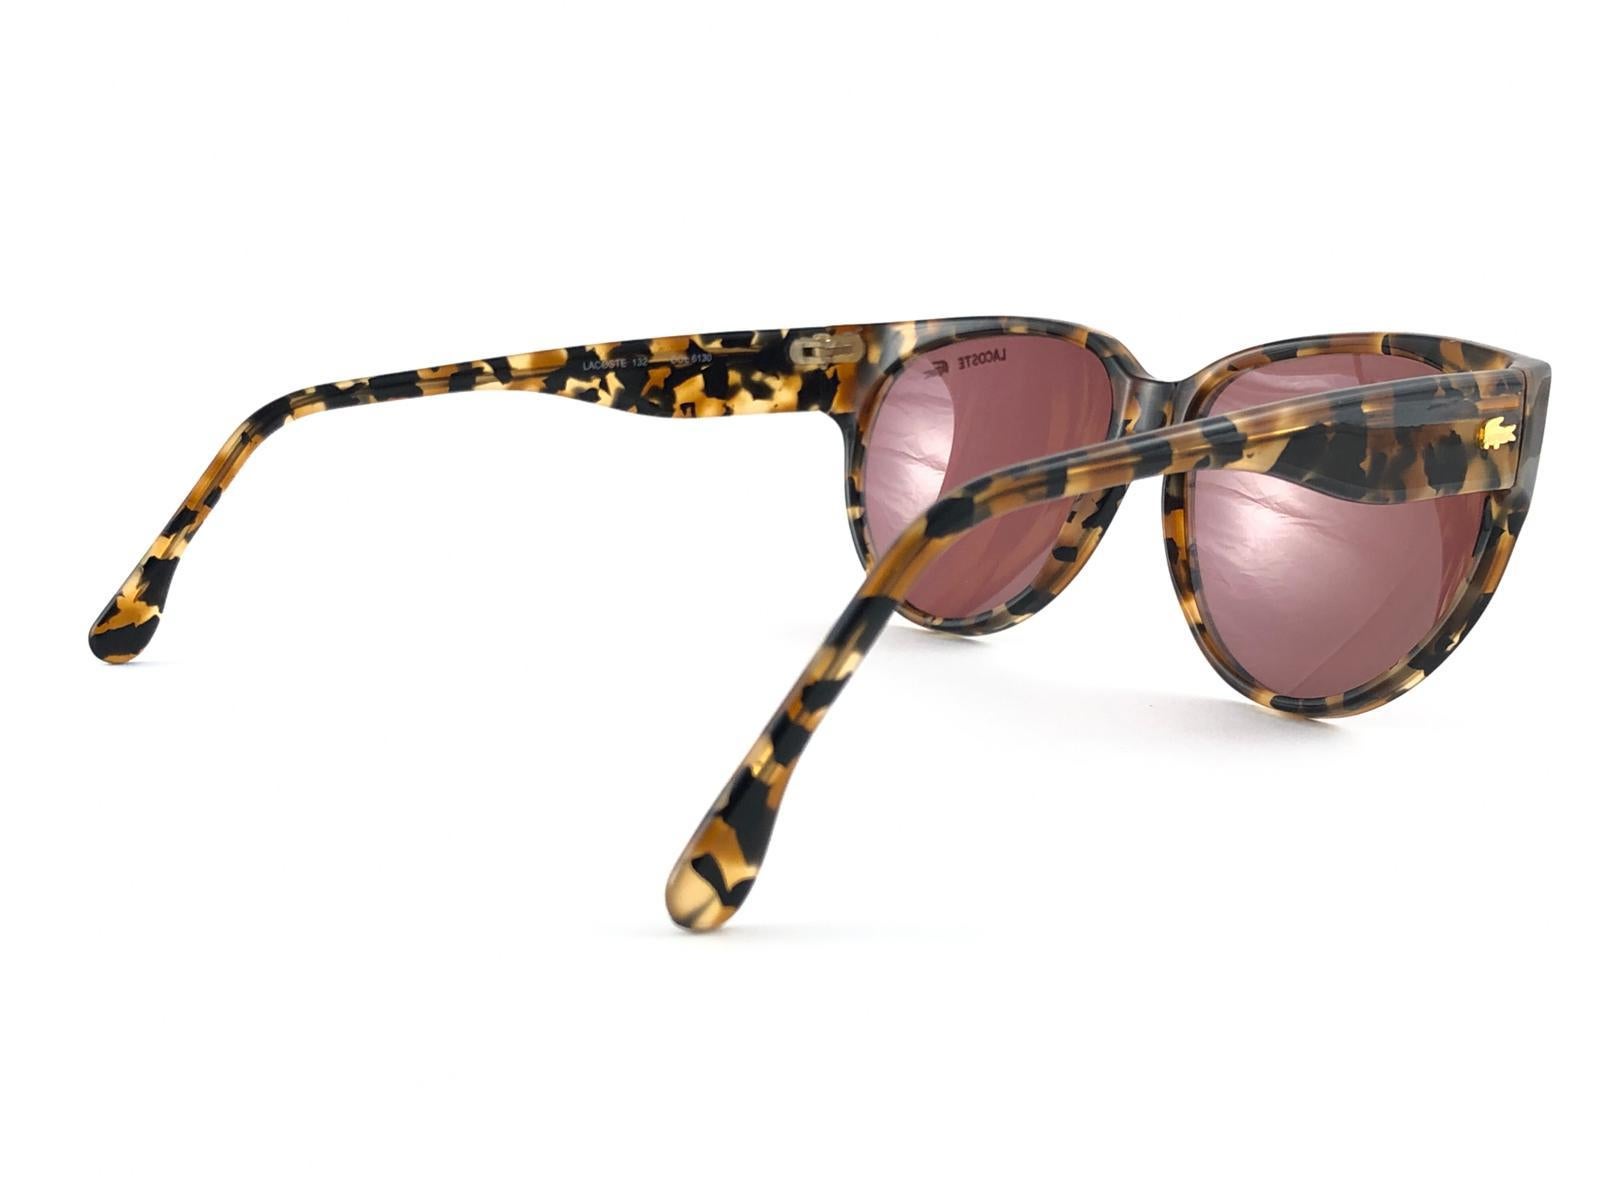 New Vintage Lacoste 132 Tortoise Cat Eye  1980's Sunglasses Made in France  For Sale 3